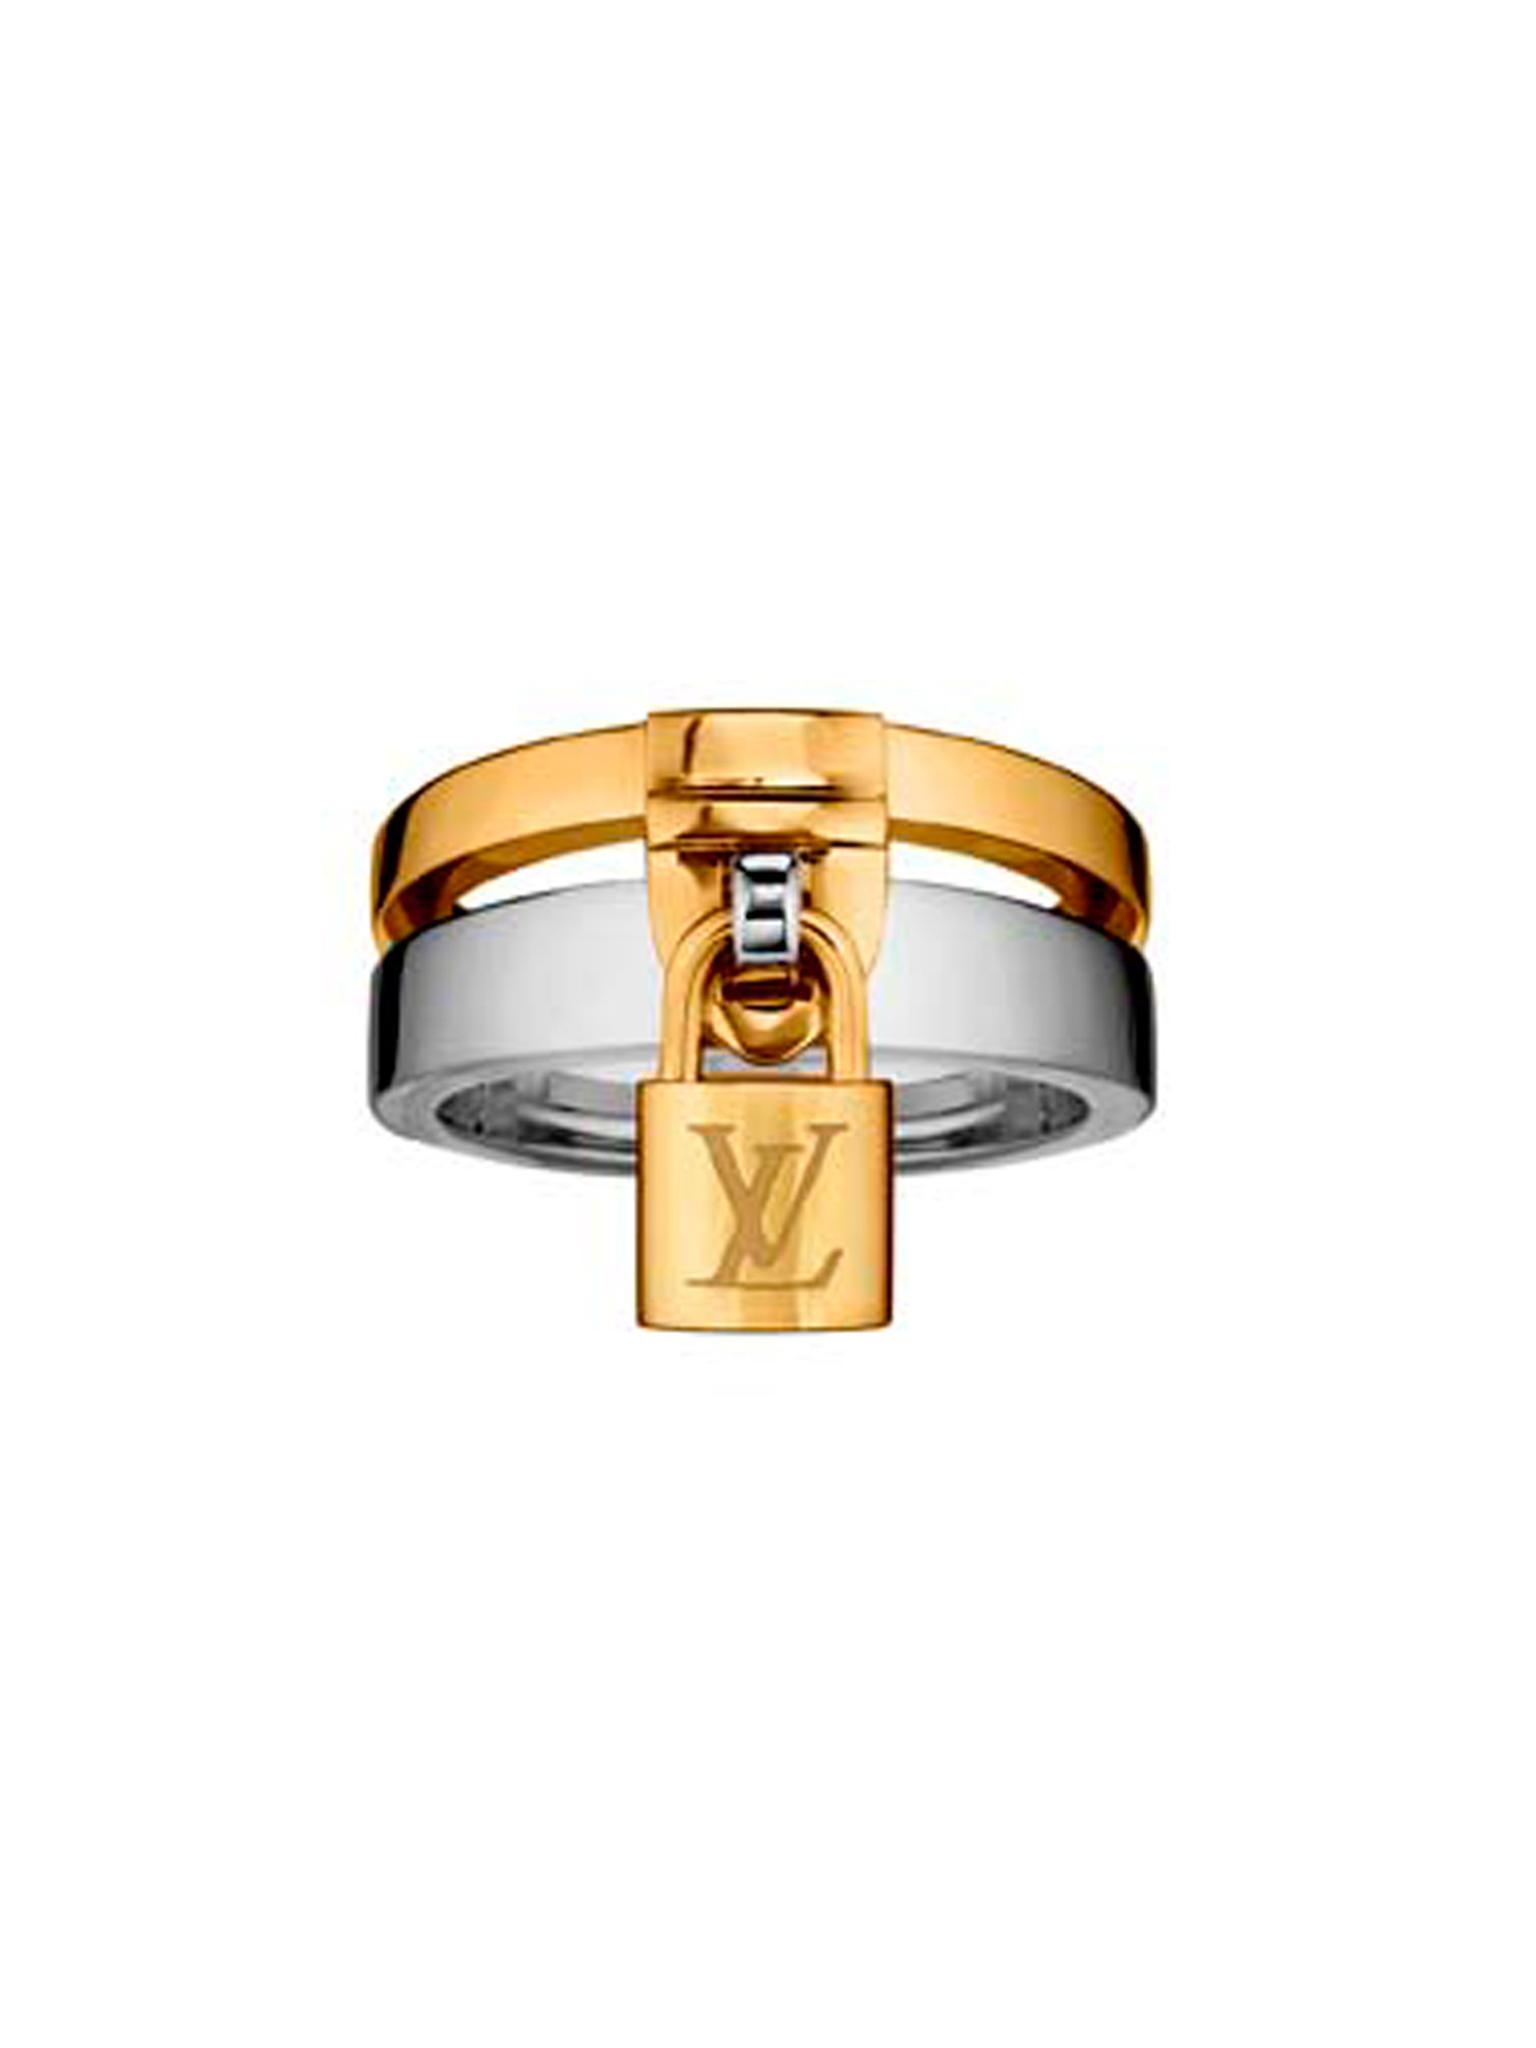 The Louis Vuitton Lockit ring in yellow gold is secured to the white gold ring with a LV embossed padlock, reminiscent of the locks on Louis Vuitton's iconic steamer trunks (£2,620).